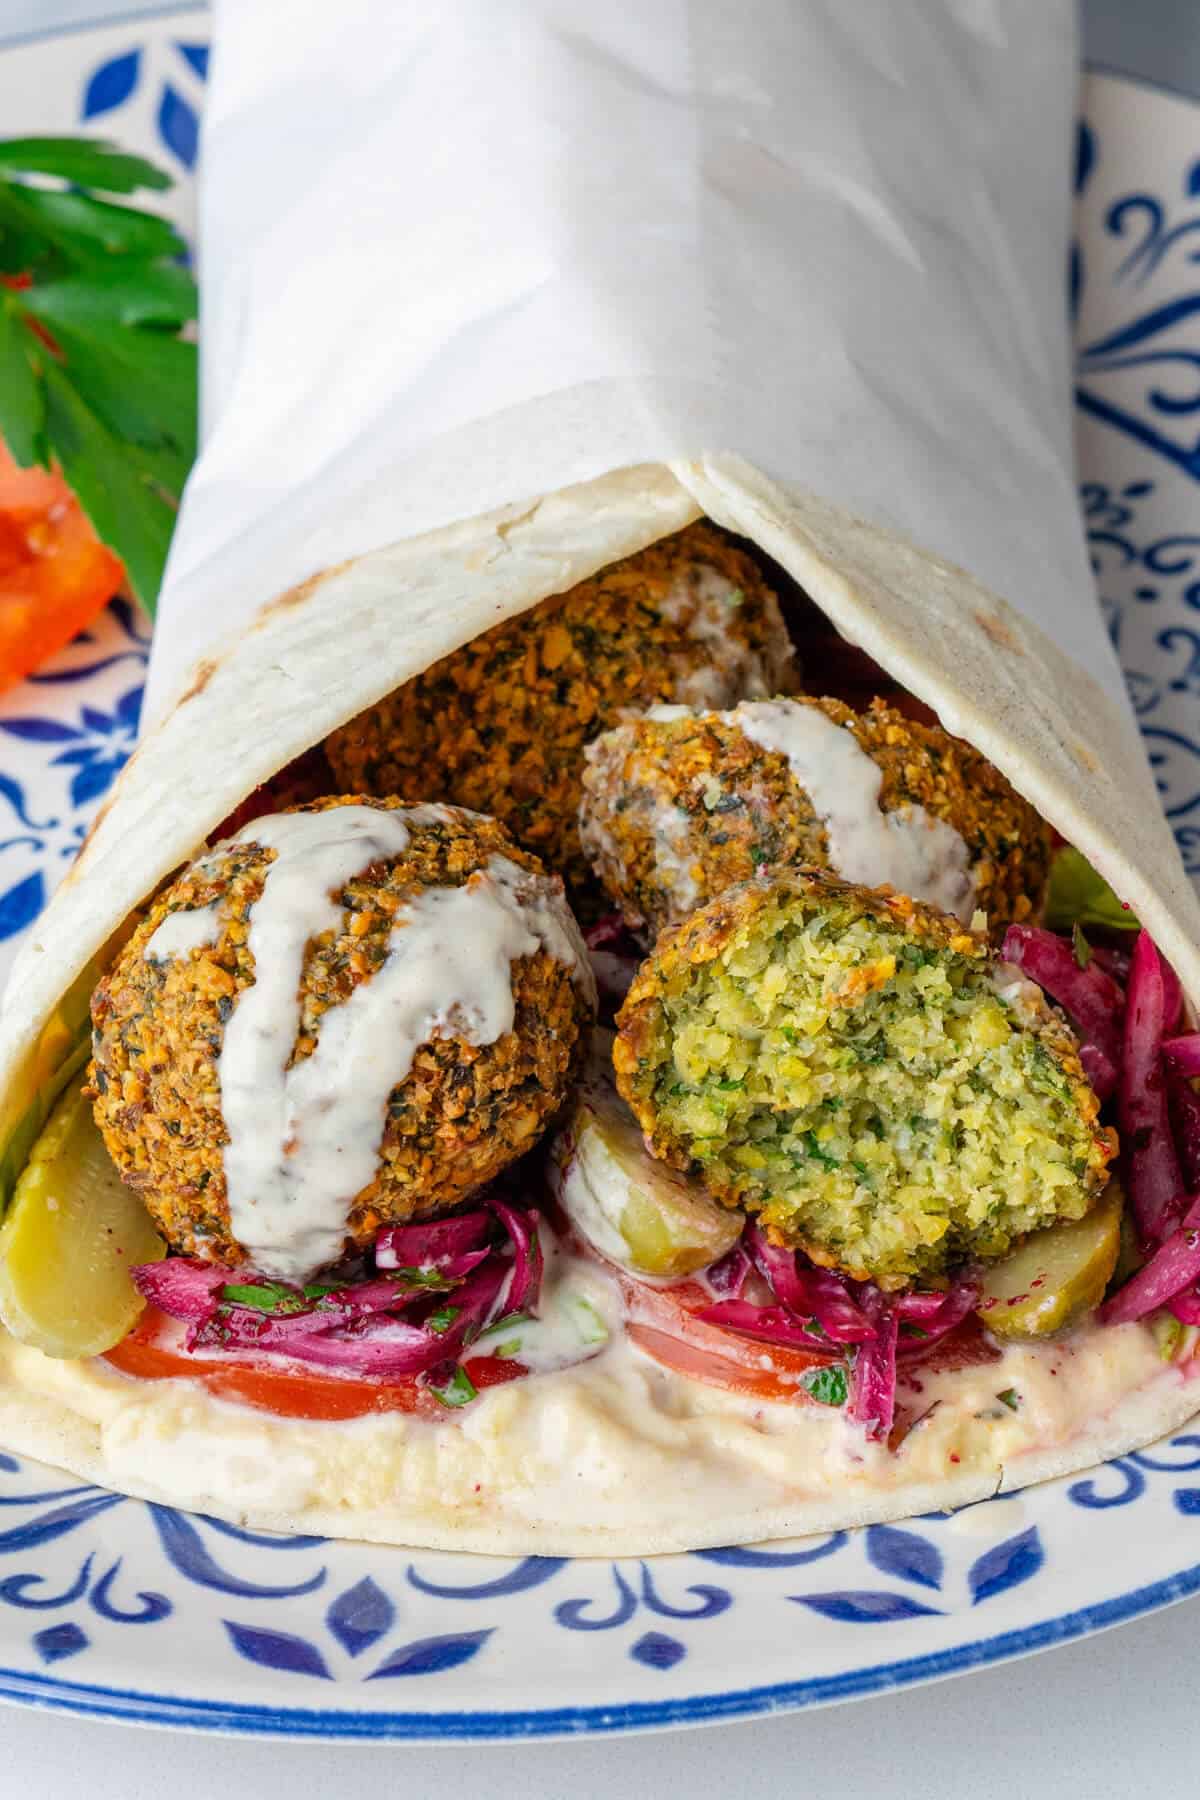 Falafel wrap with piece cut in half to show the inside